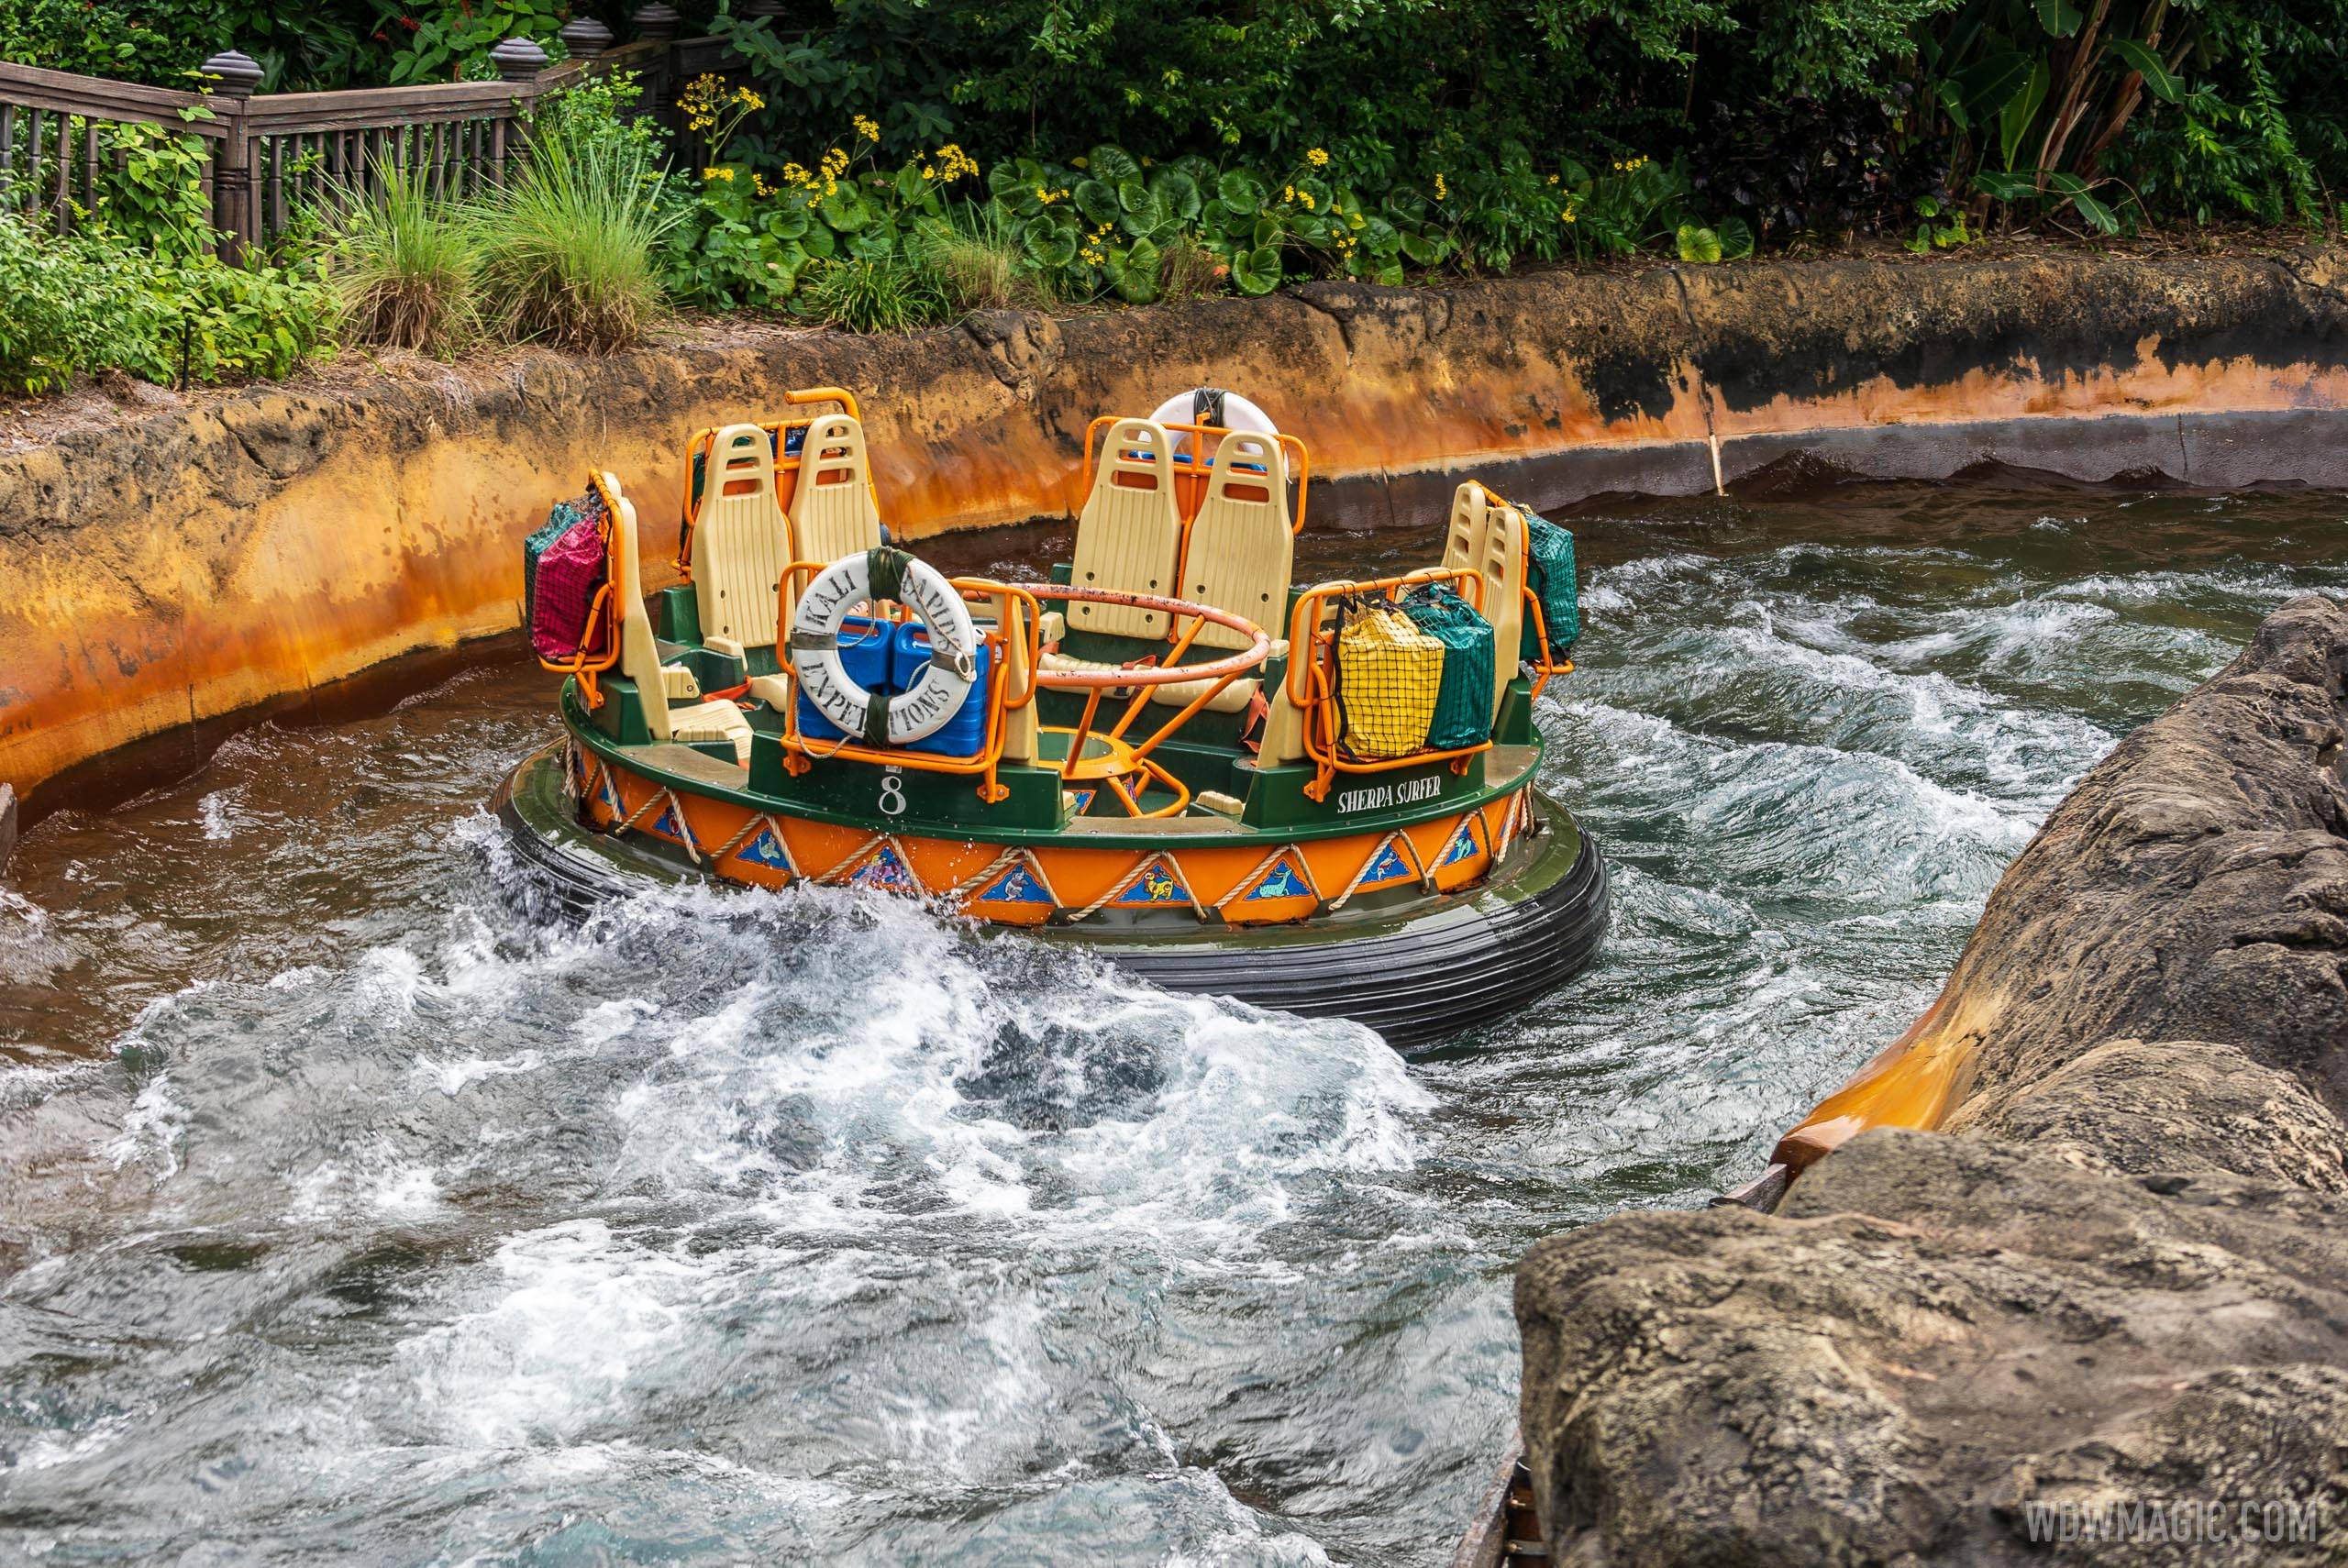 Kali Rapids opening delayed today due to freezing temperatures